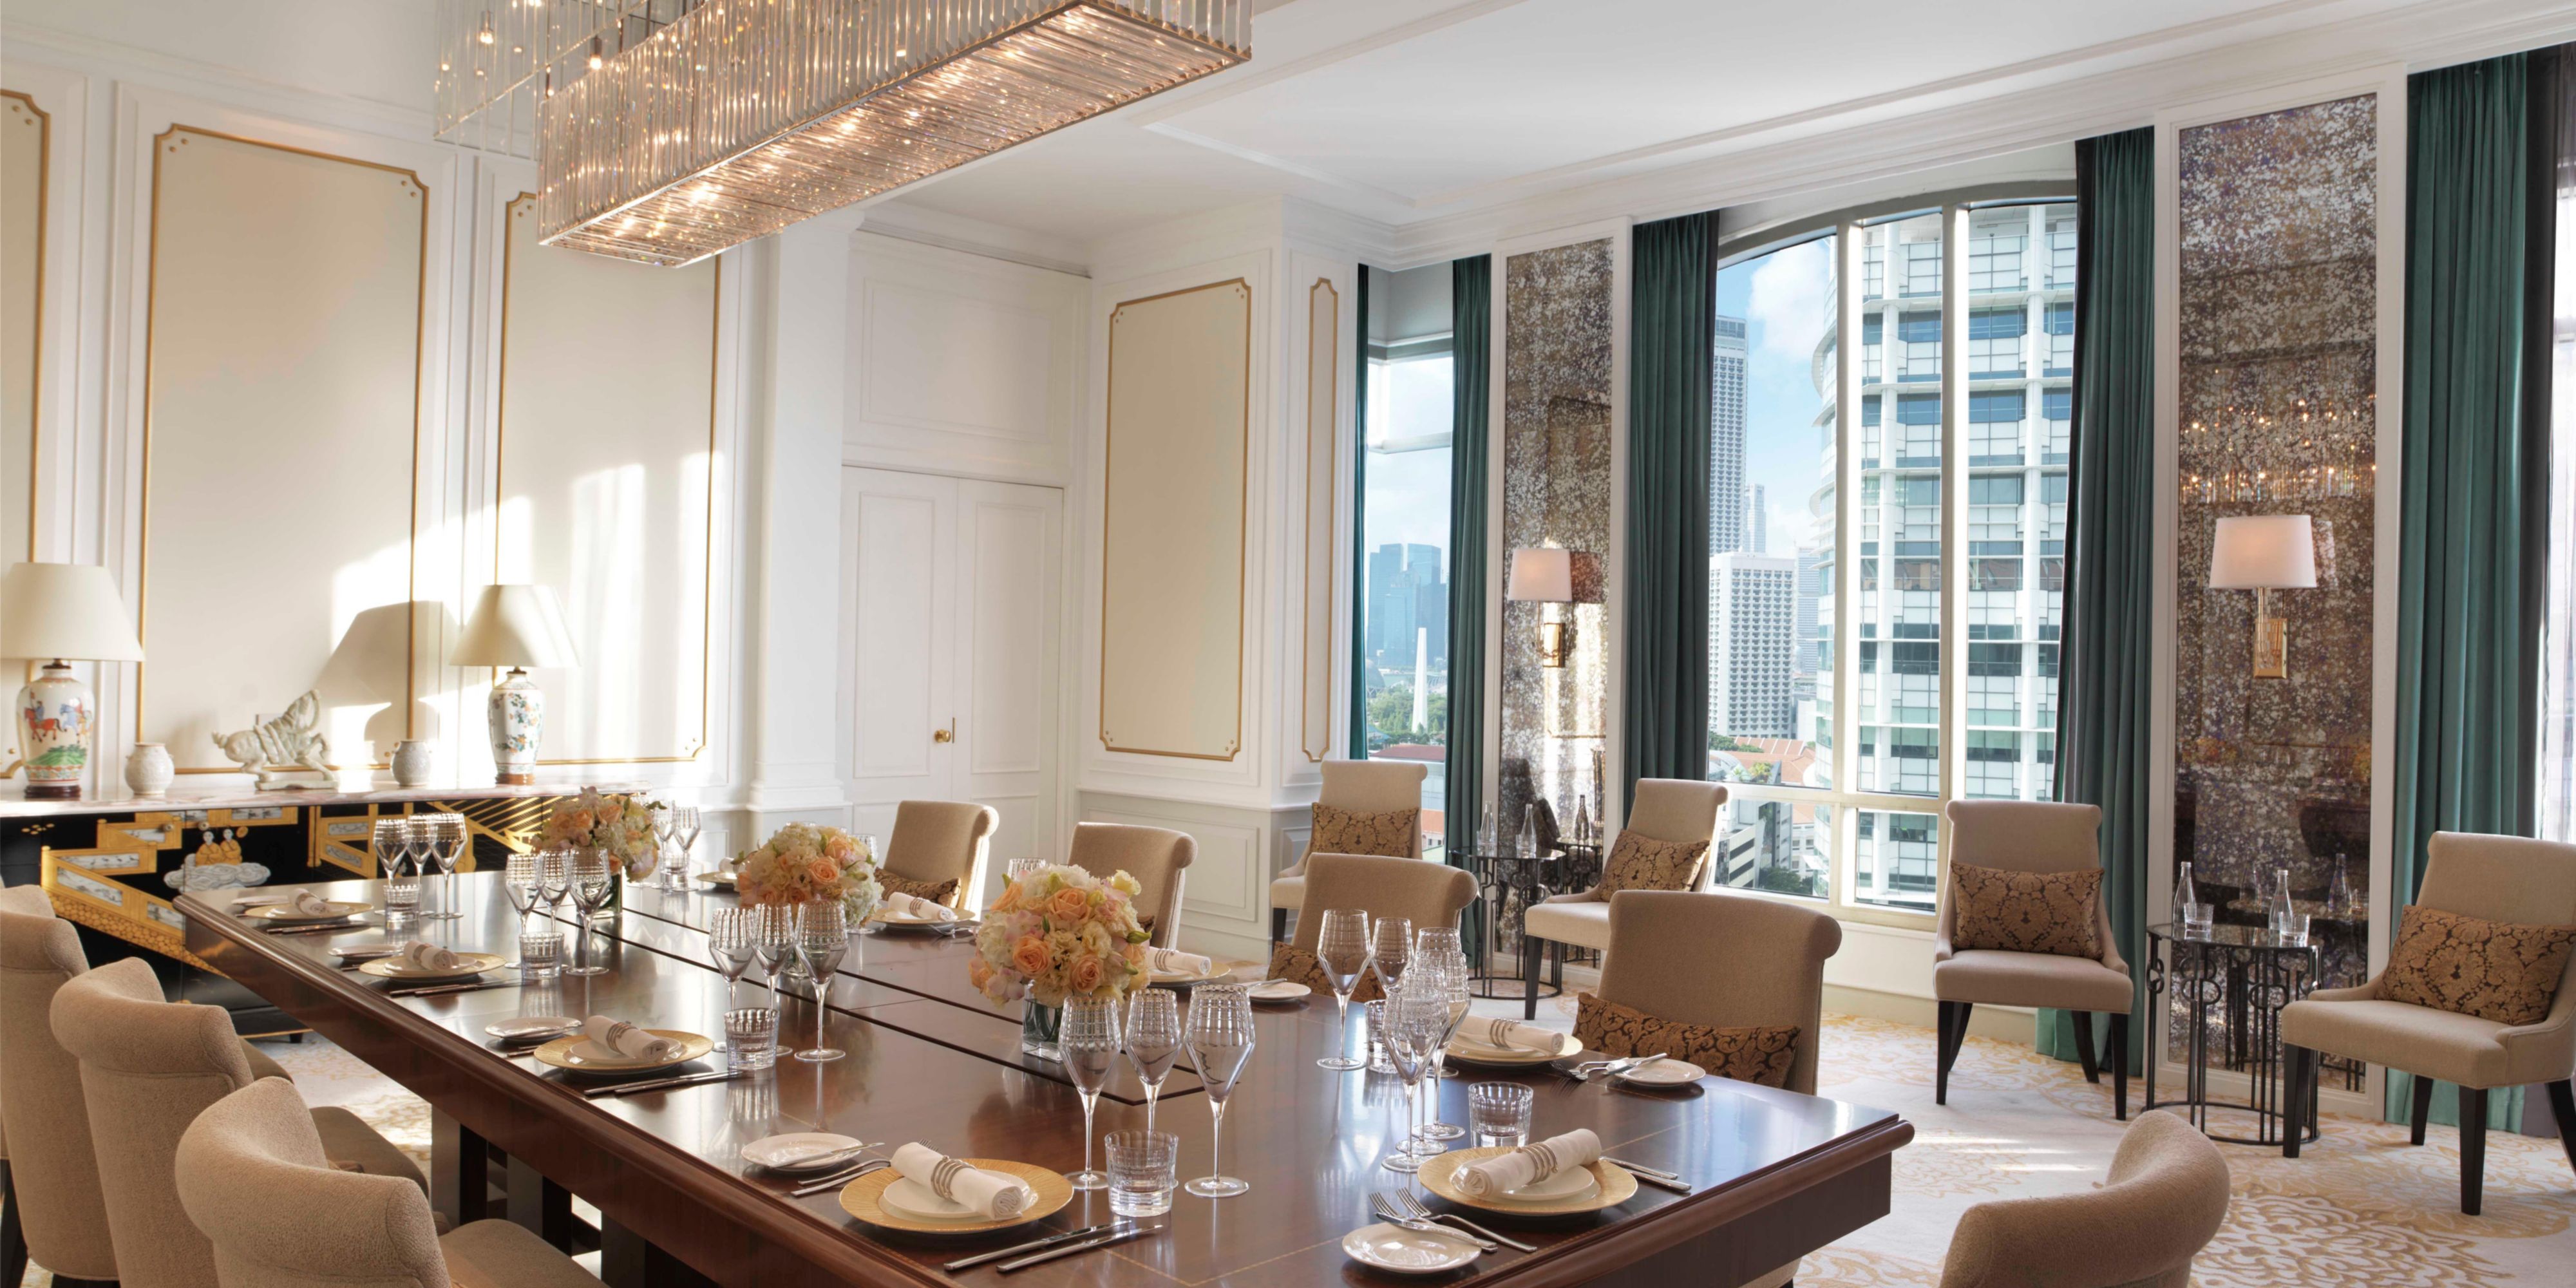 Delight in state-of-the-art facilities and elegantly appointed venues with natural daylight at InterContinental Singapore, one of Asia's top choices for meeting planners. Select from over 1,000sqm of flexible meeting space from the pillarless Grand Ballroom to the exclusive Presidential Suite and more.